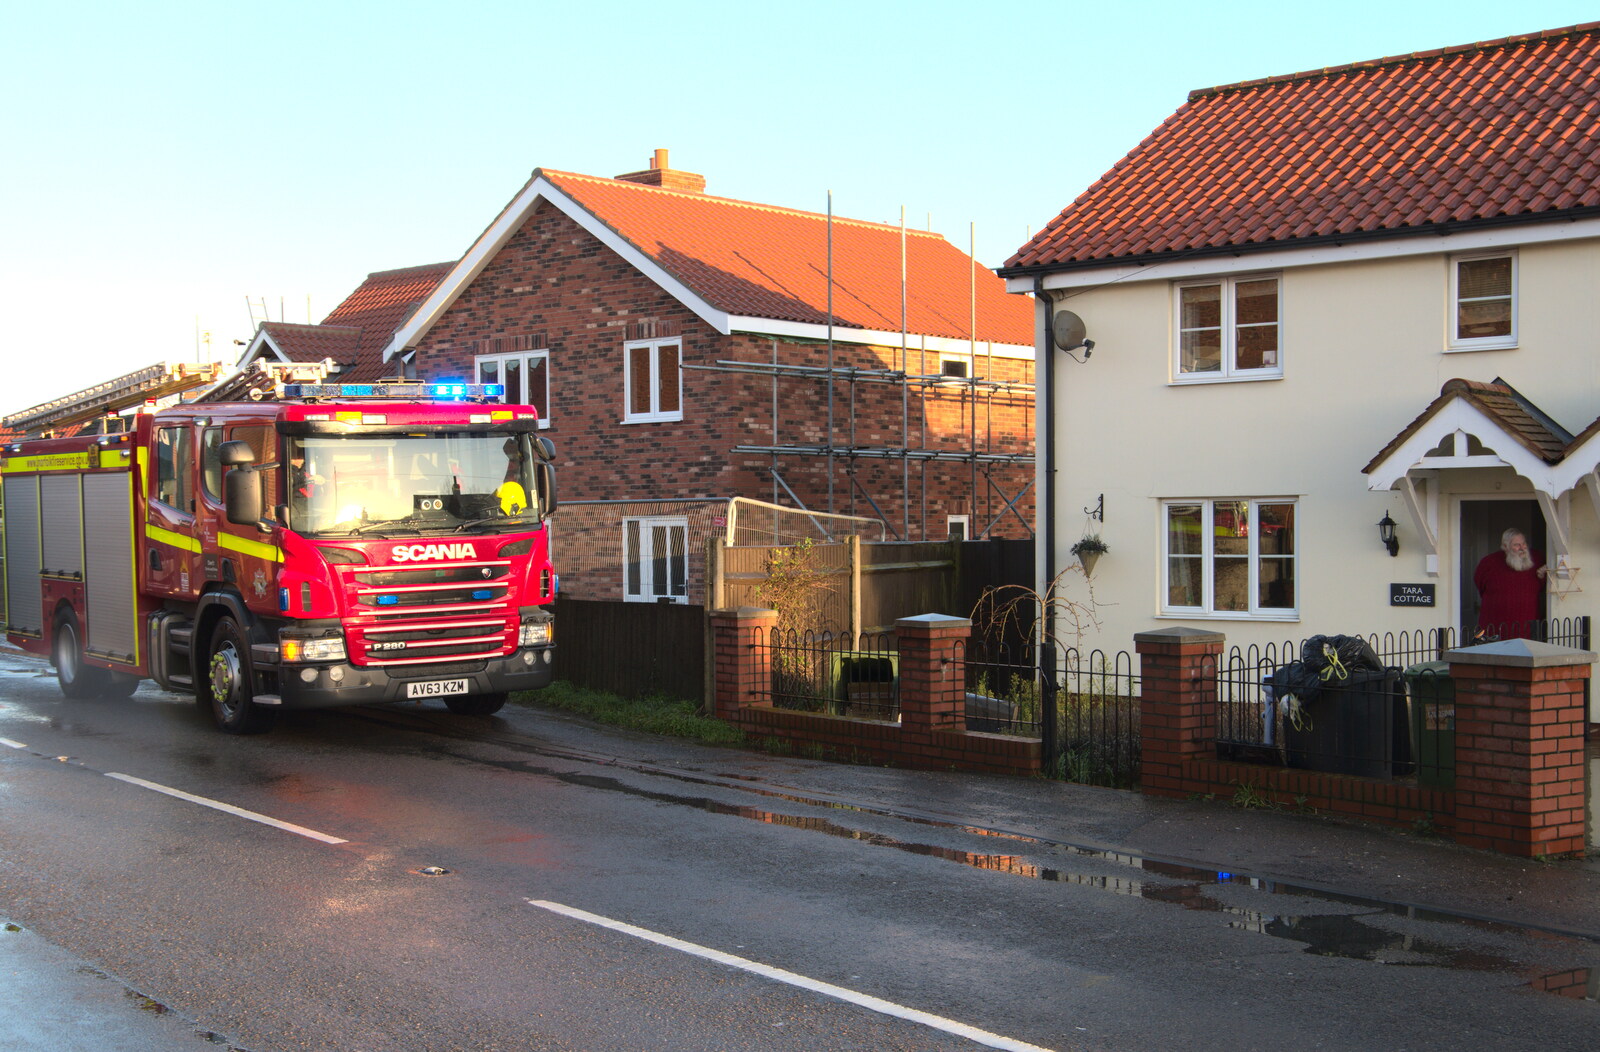 The fire engine is on standby for pumping from The Christmas Eve Floods, Diss, Norfolk - 24th December 2020